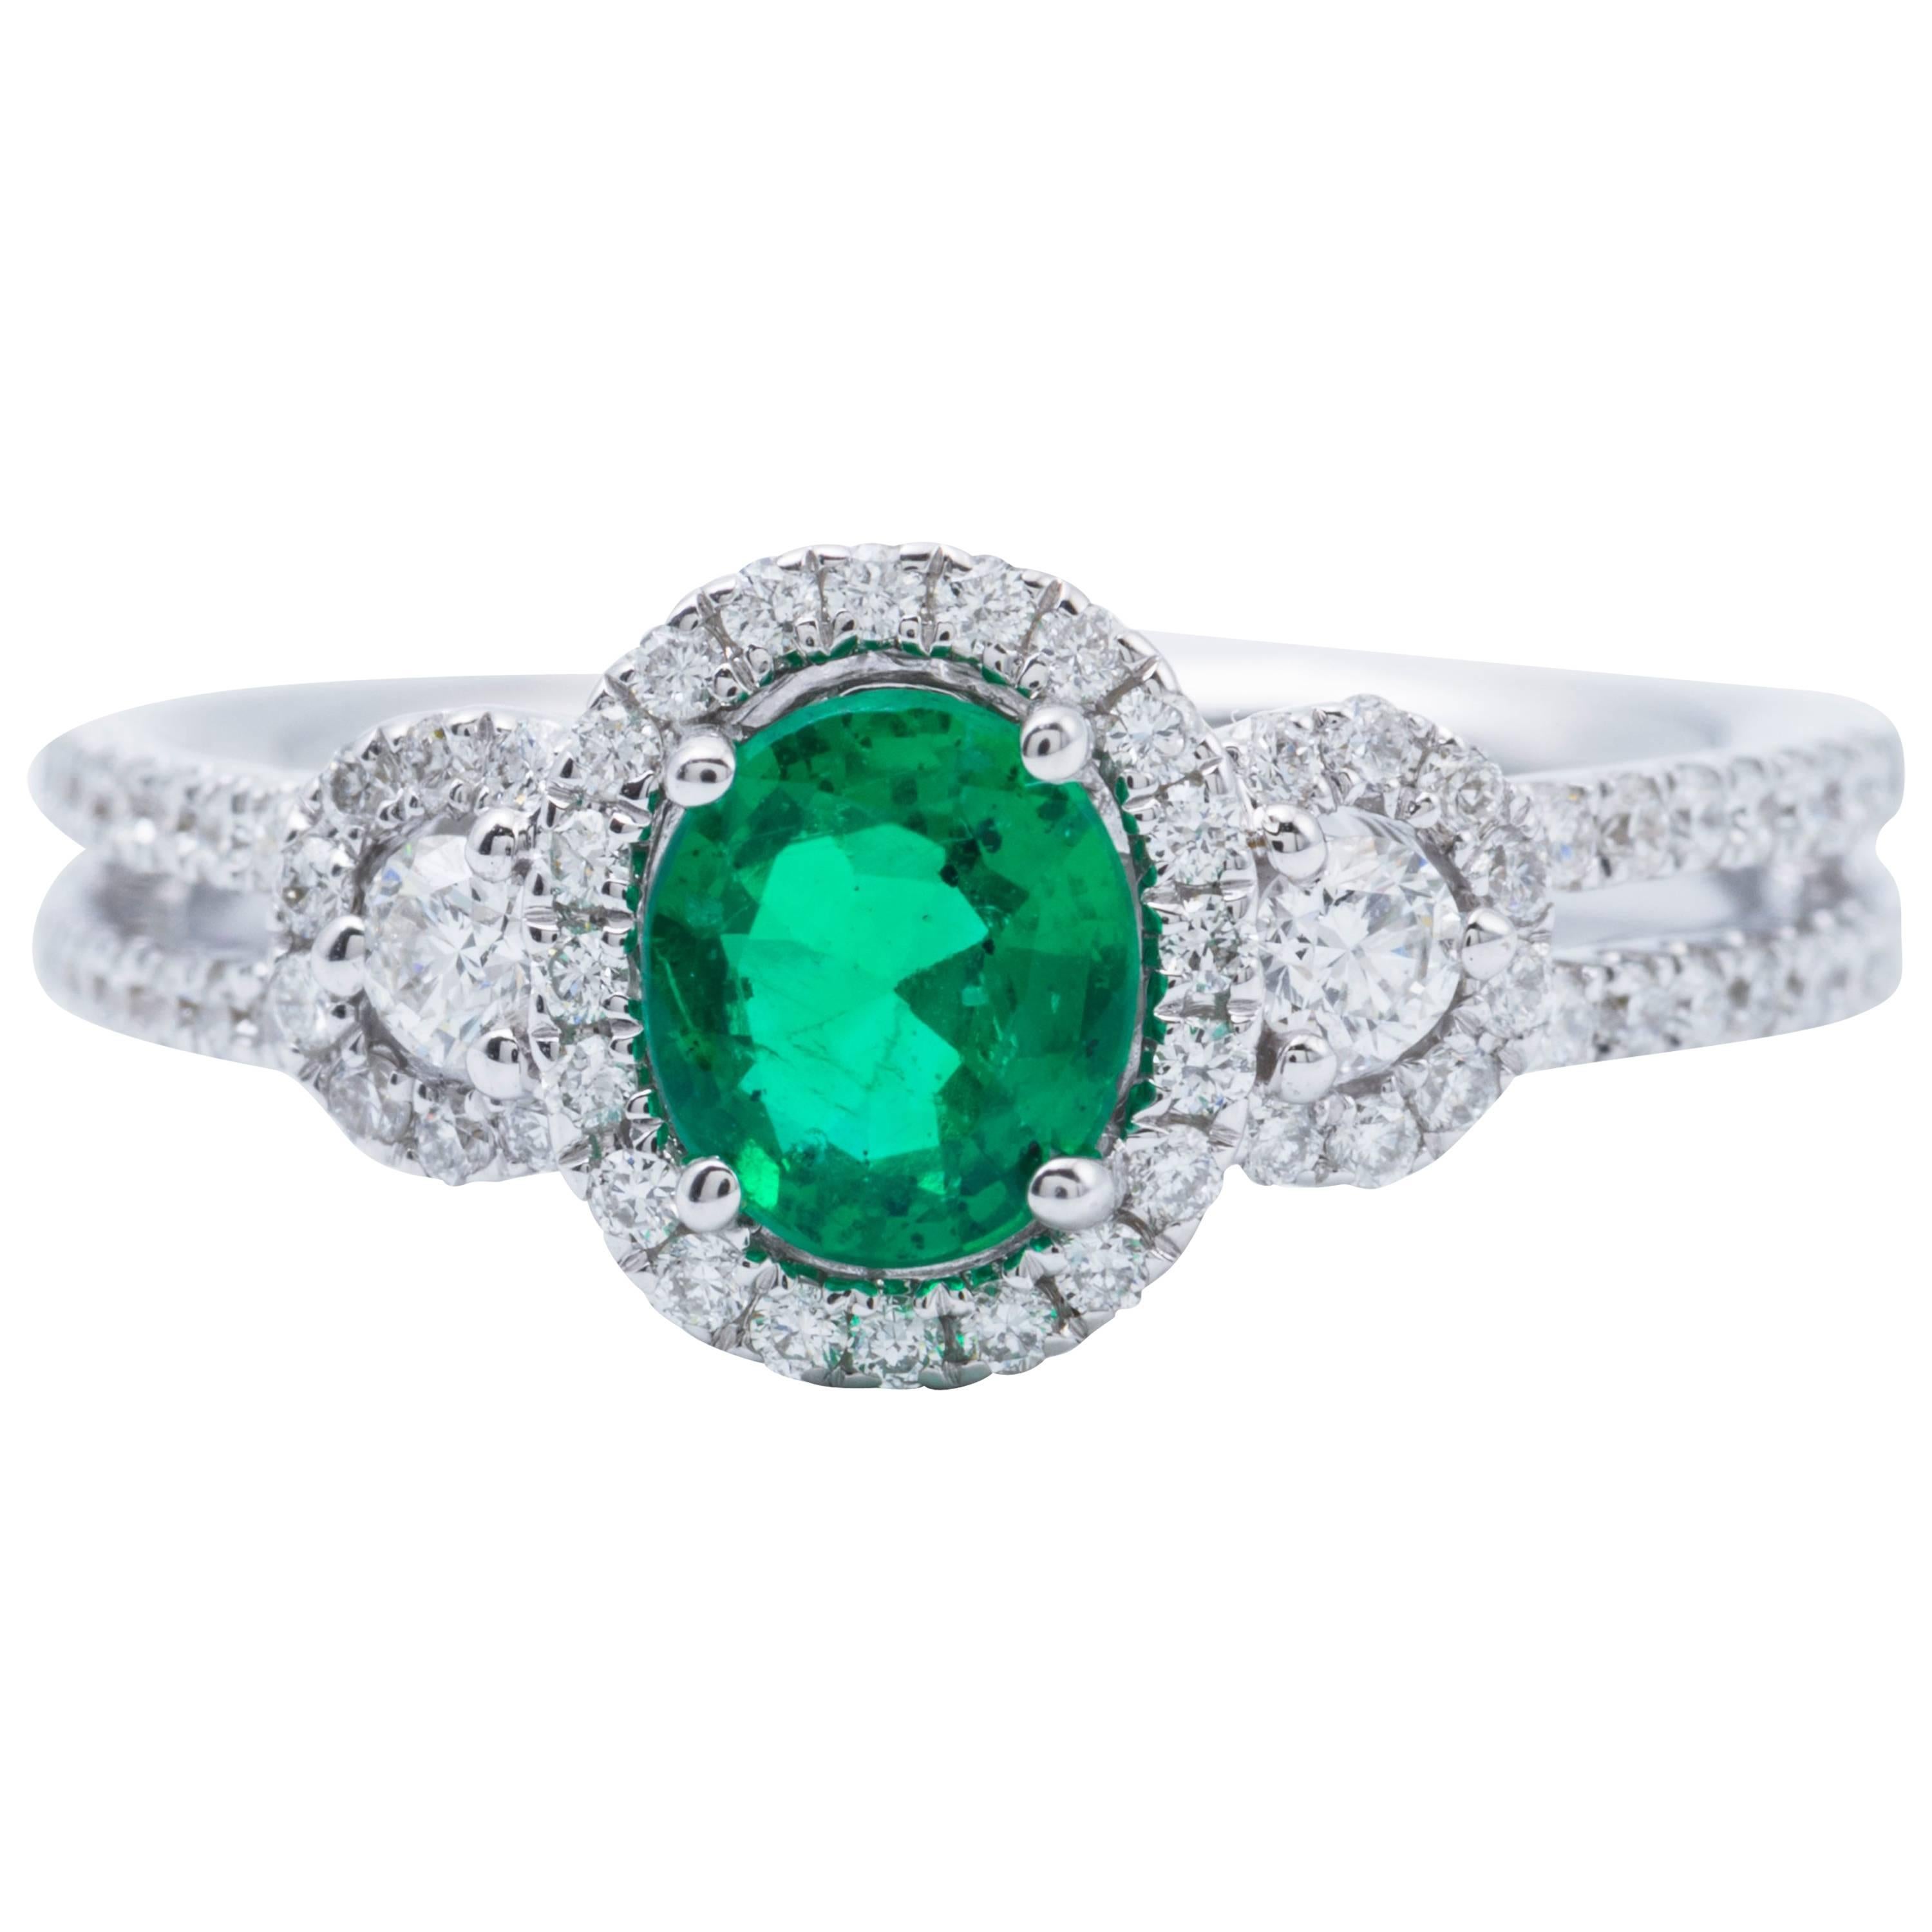 Oval Shape Emerald Diamond Gold Halo Engagement Cocktail Ring